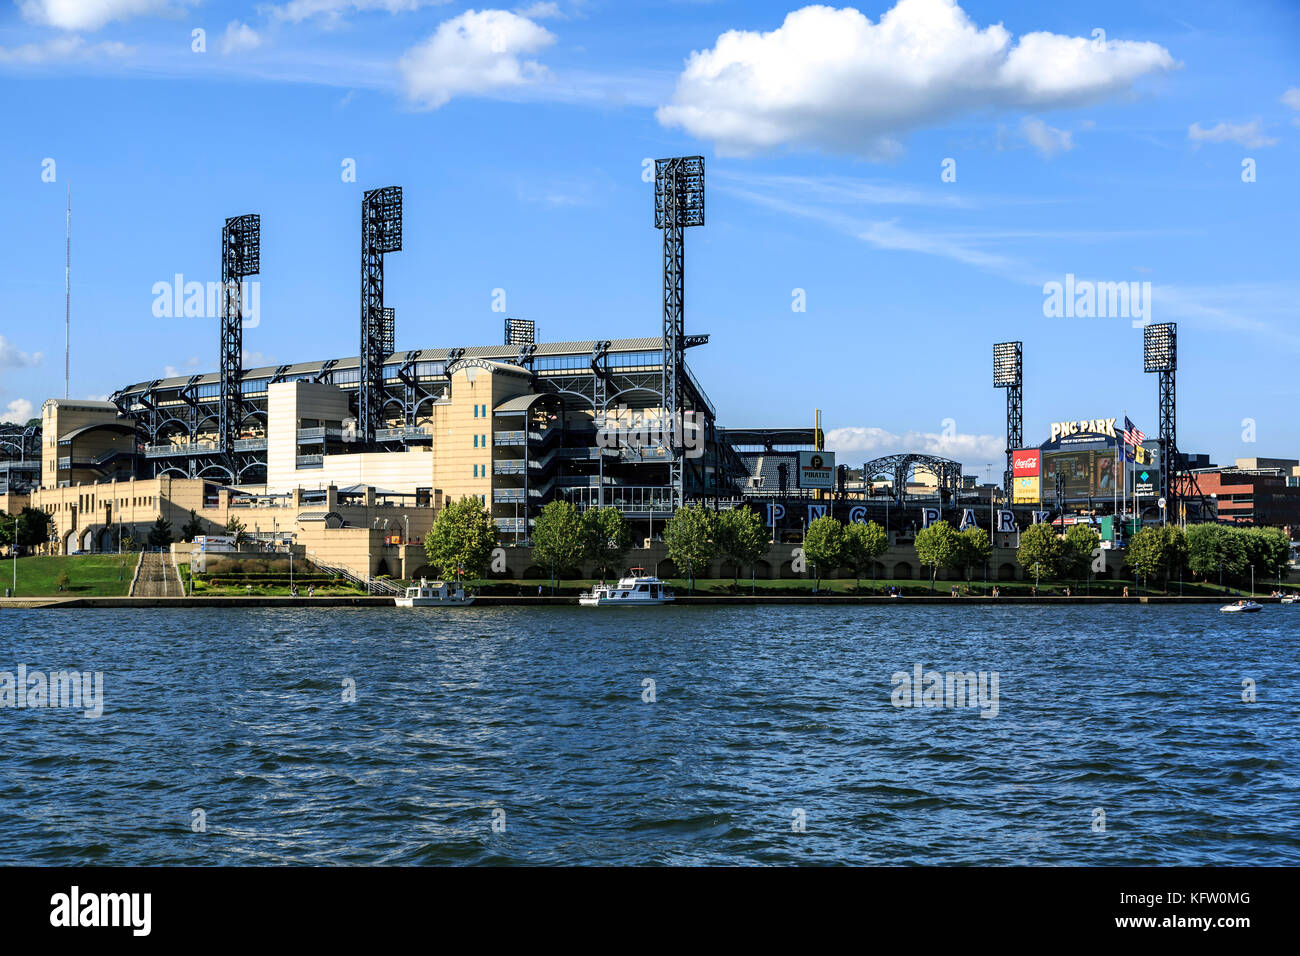 PNC Baseball Park (home of the Pittsburgh Pirates Major League Baseball Team), and Allegheny River, Pittsburgh, Pennsylvania USA Stock Photo